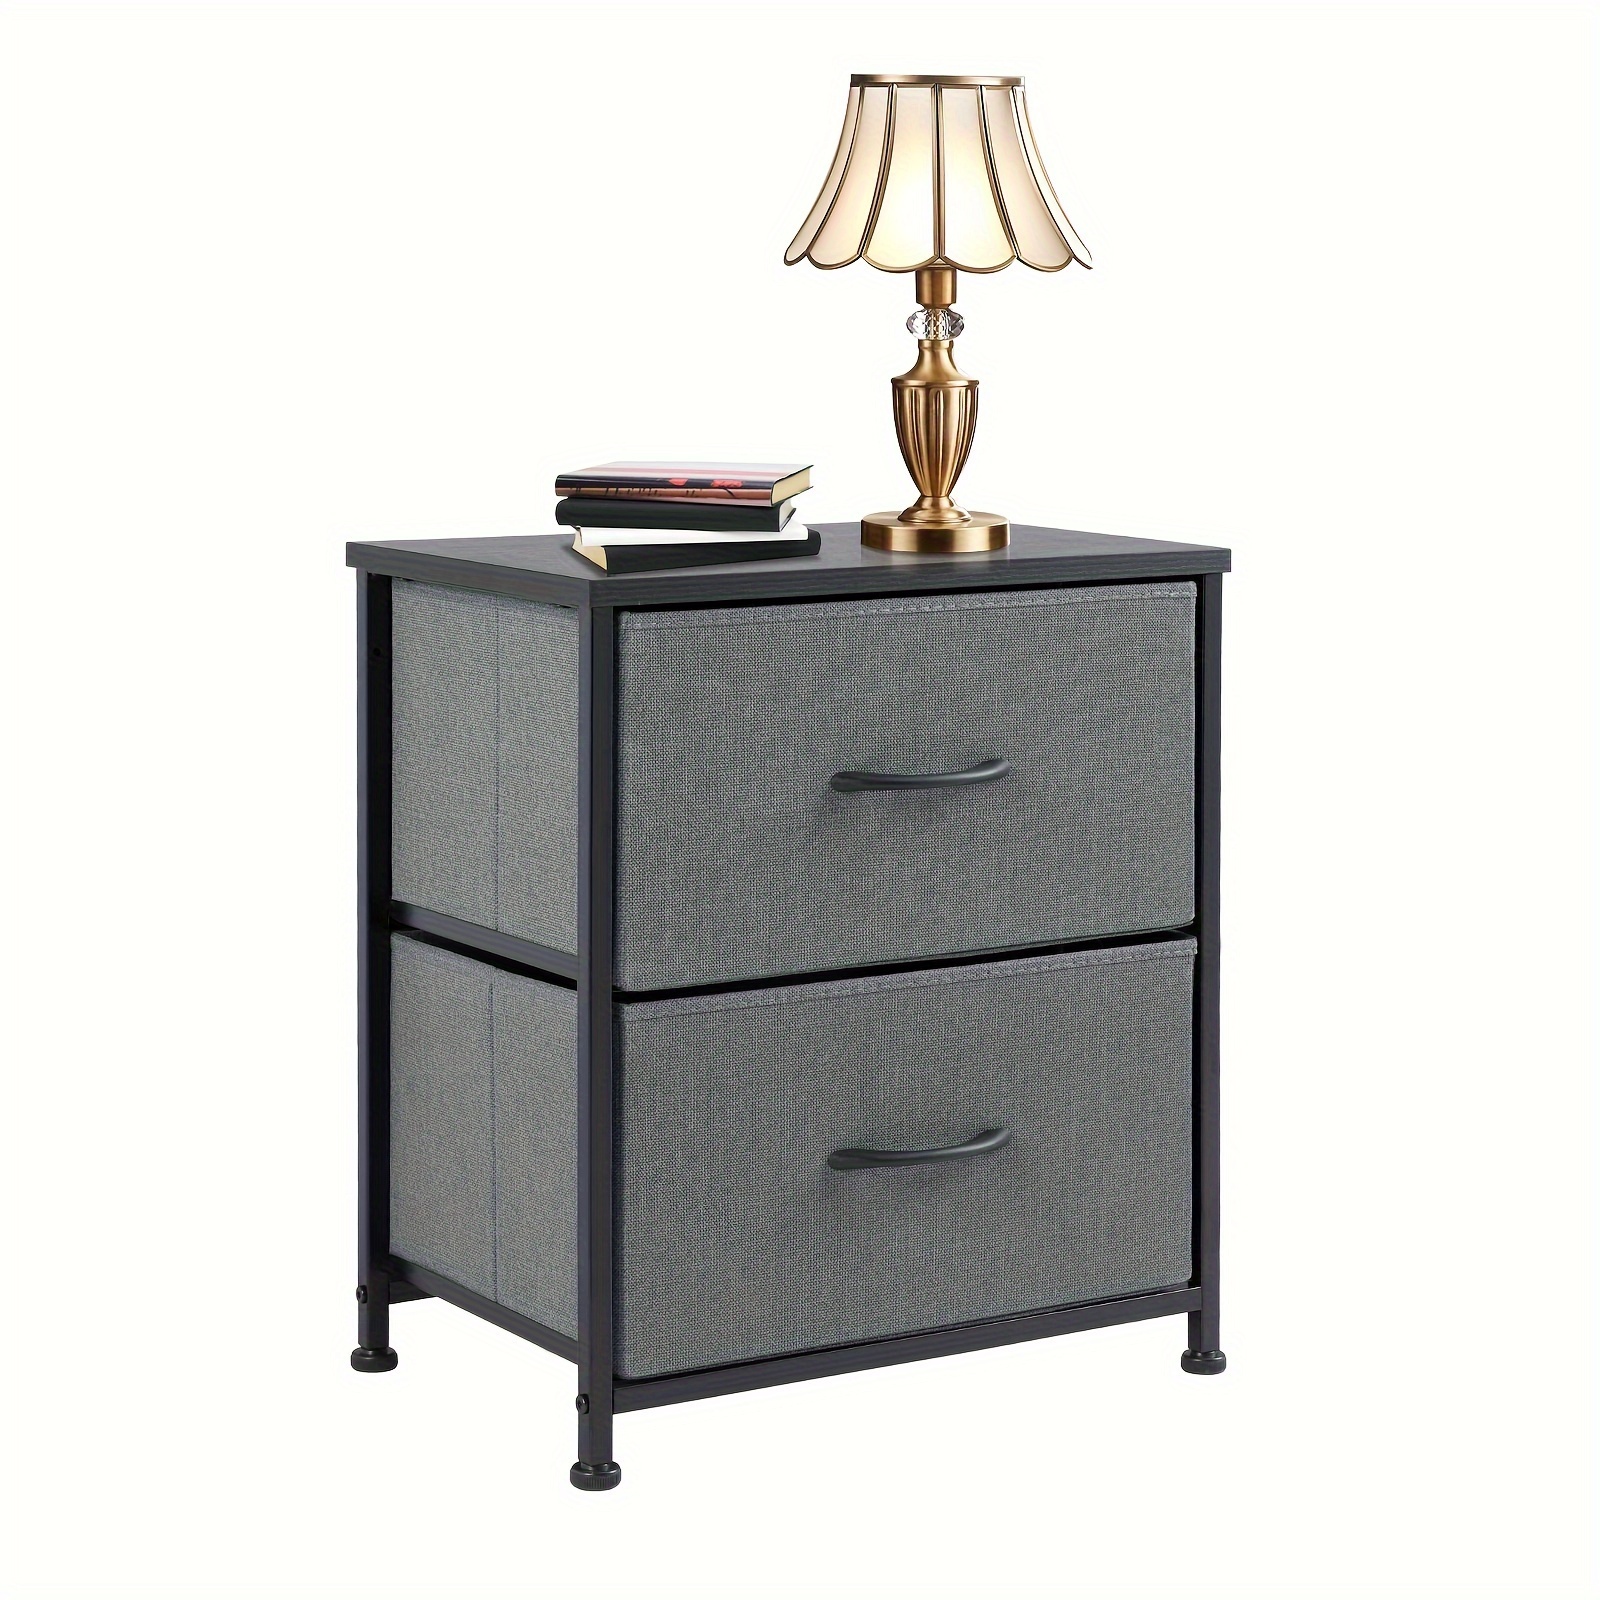 

Olixis Nightstand With 2 Storage Drawers, 20" Height Small Furniture End Table, Wooden Top Fabric Cabinet Night Stand Mini Dresser